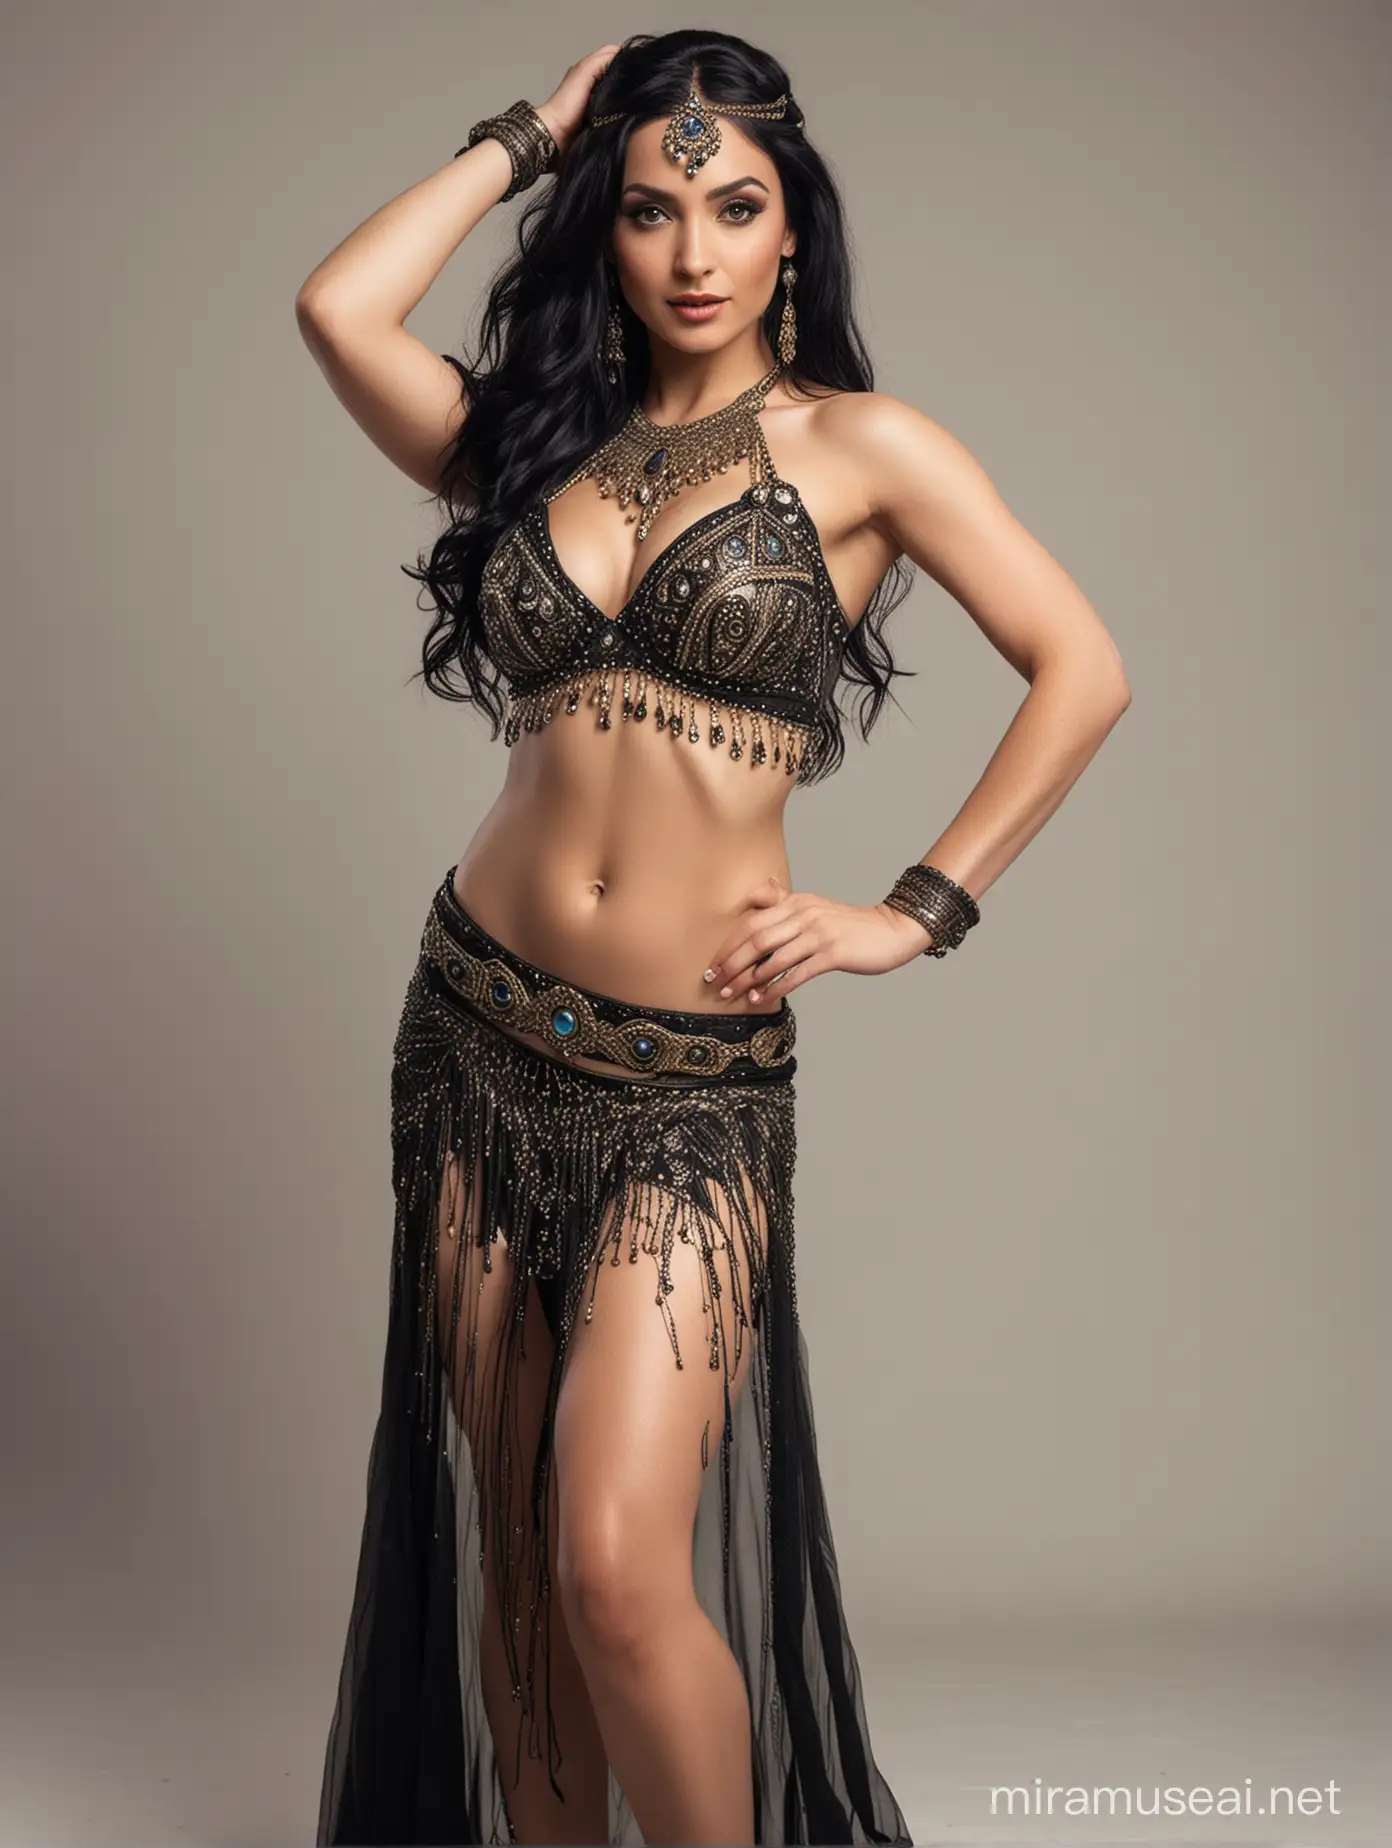 Valyrian woman, valyrian style black hair,belly dancer outfit, modelshoot 